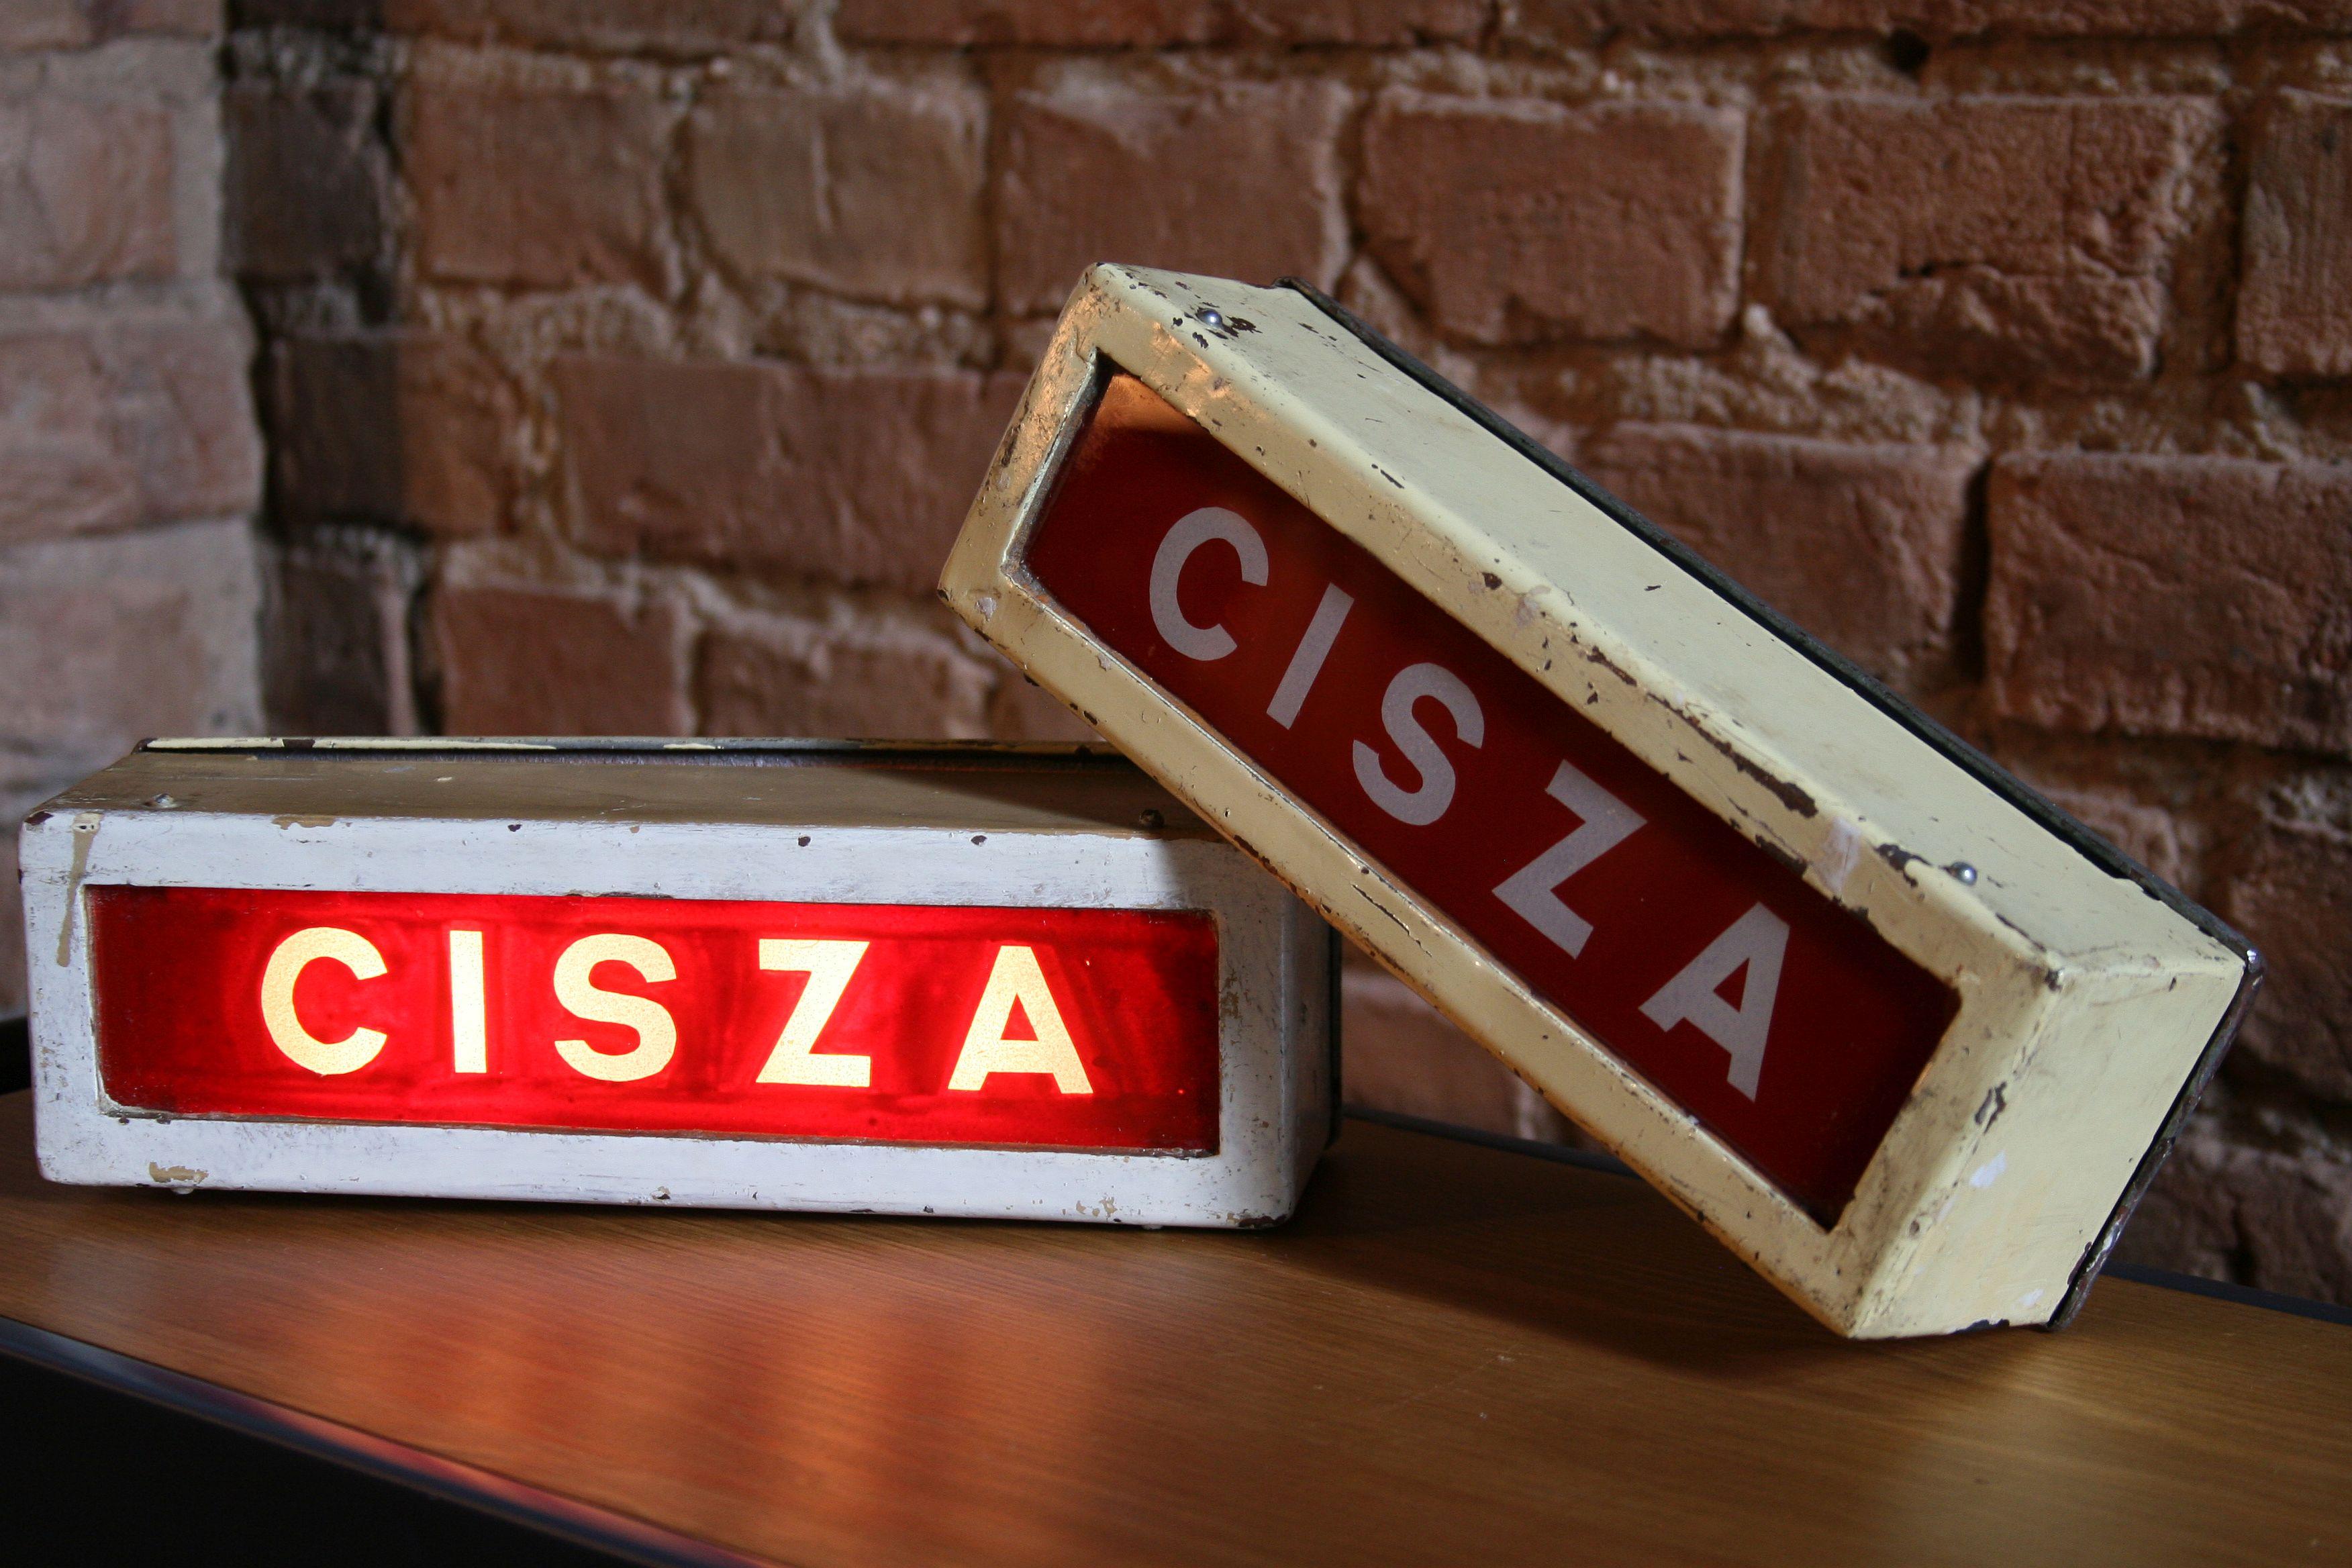 1950s Illuminated Theater Sign “Cisza”, Meaning “Silence” (Stahl)